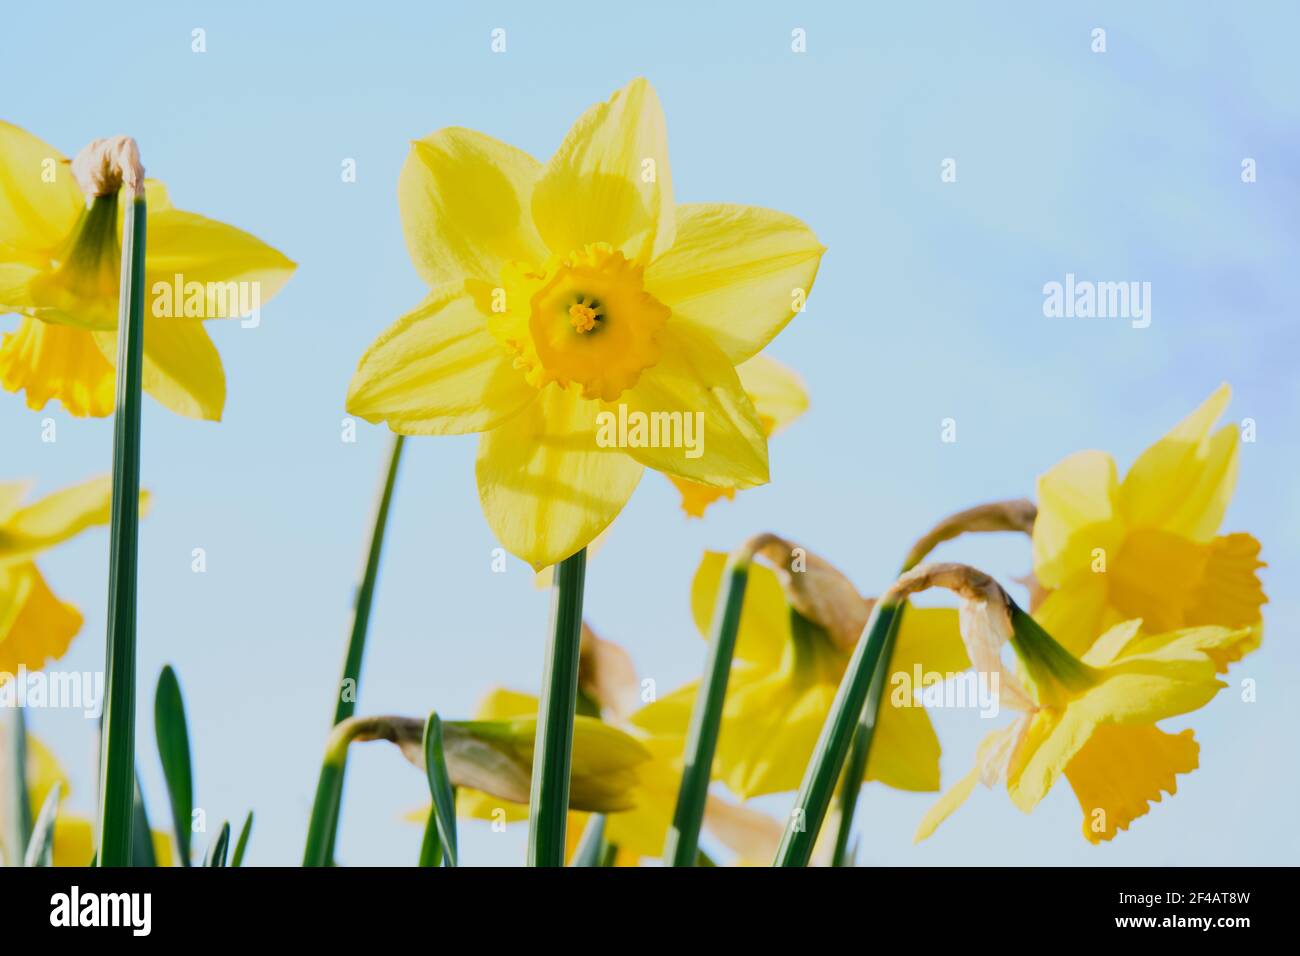 High key image of yellow daffodils.  One, facing directly forward is sharp while others are de-focused. Copy space. Stock Photo